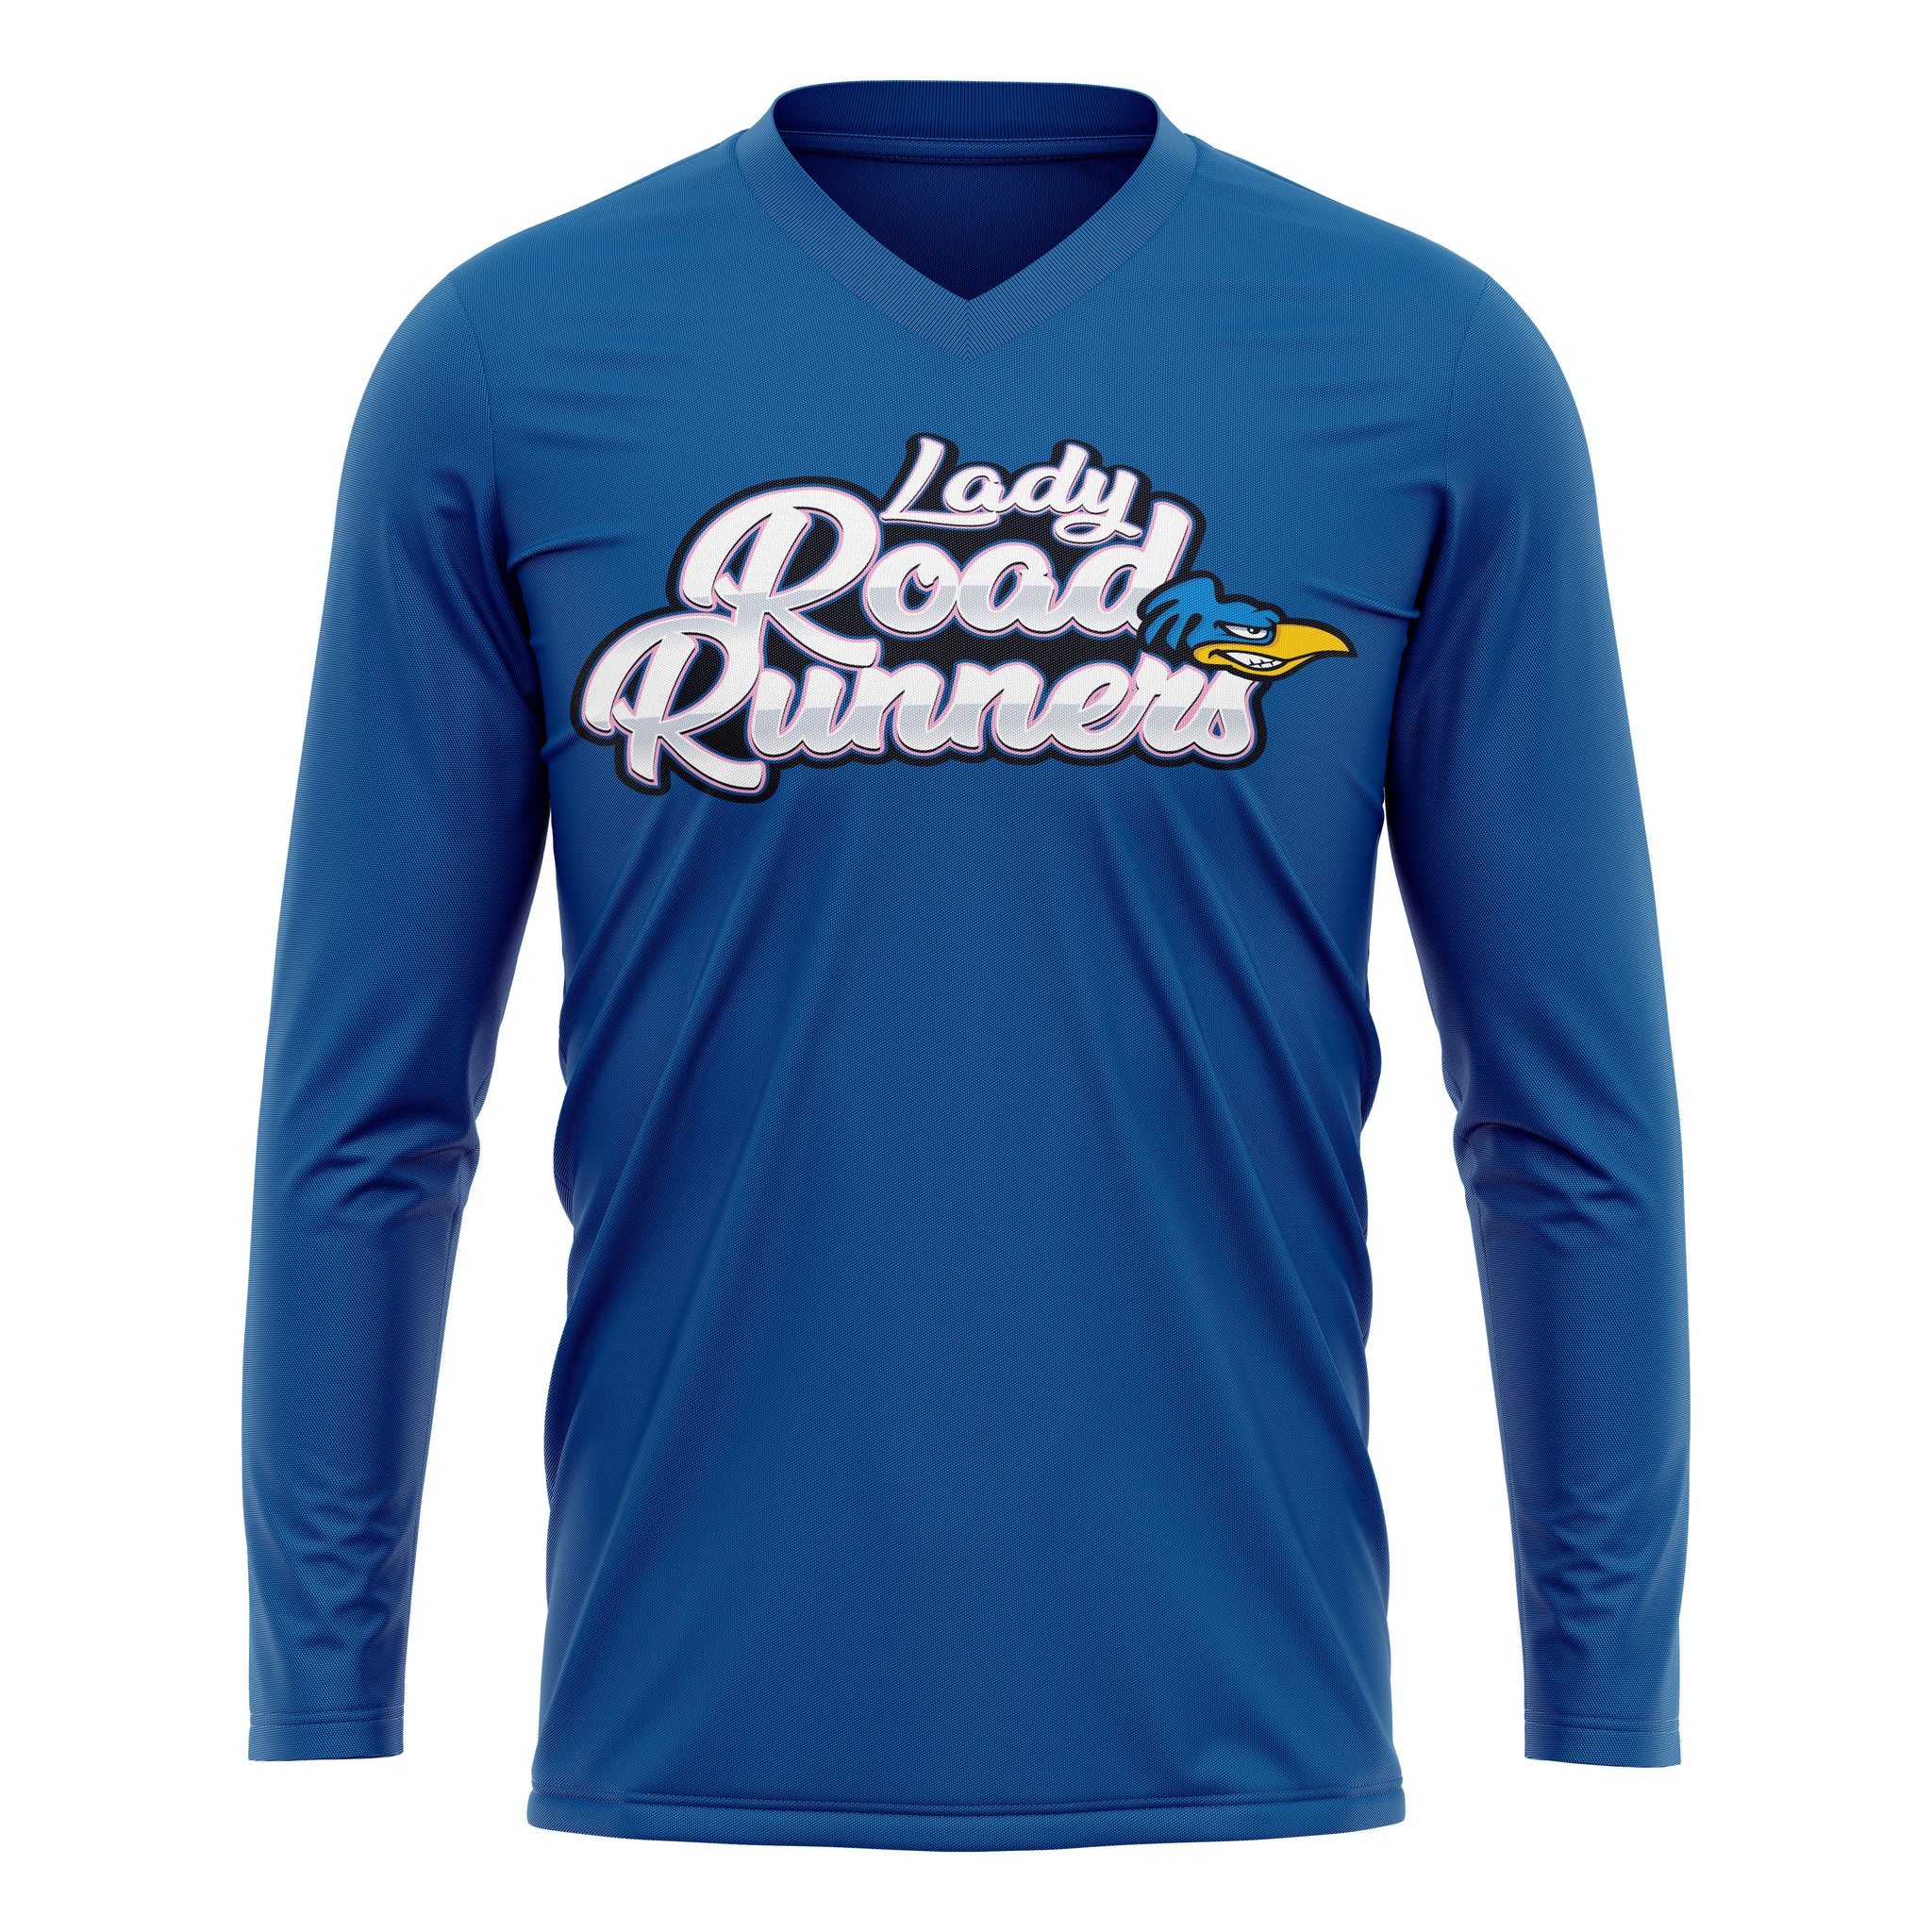 LADY ROAD RUNNERS 1.0 WOMENS V-NECK LONG SLEEVE